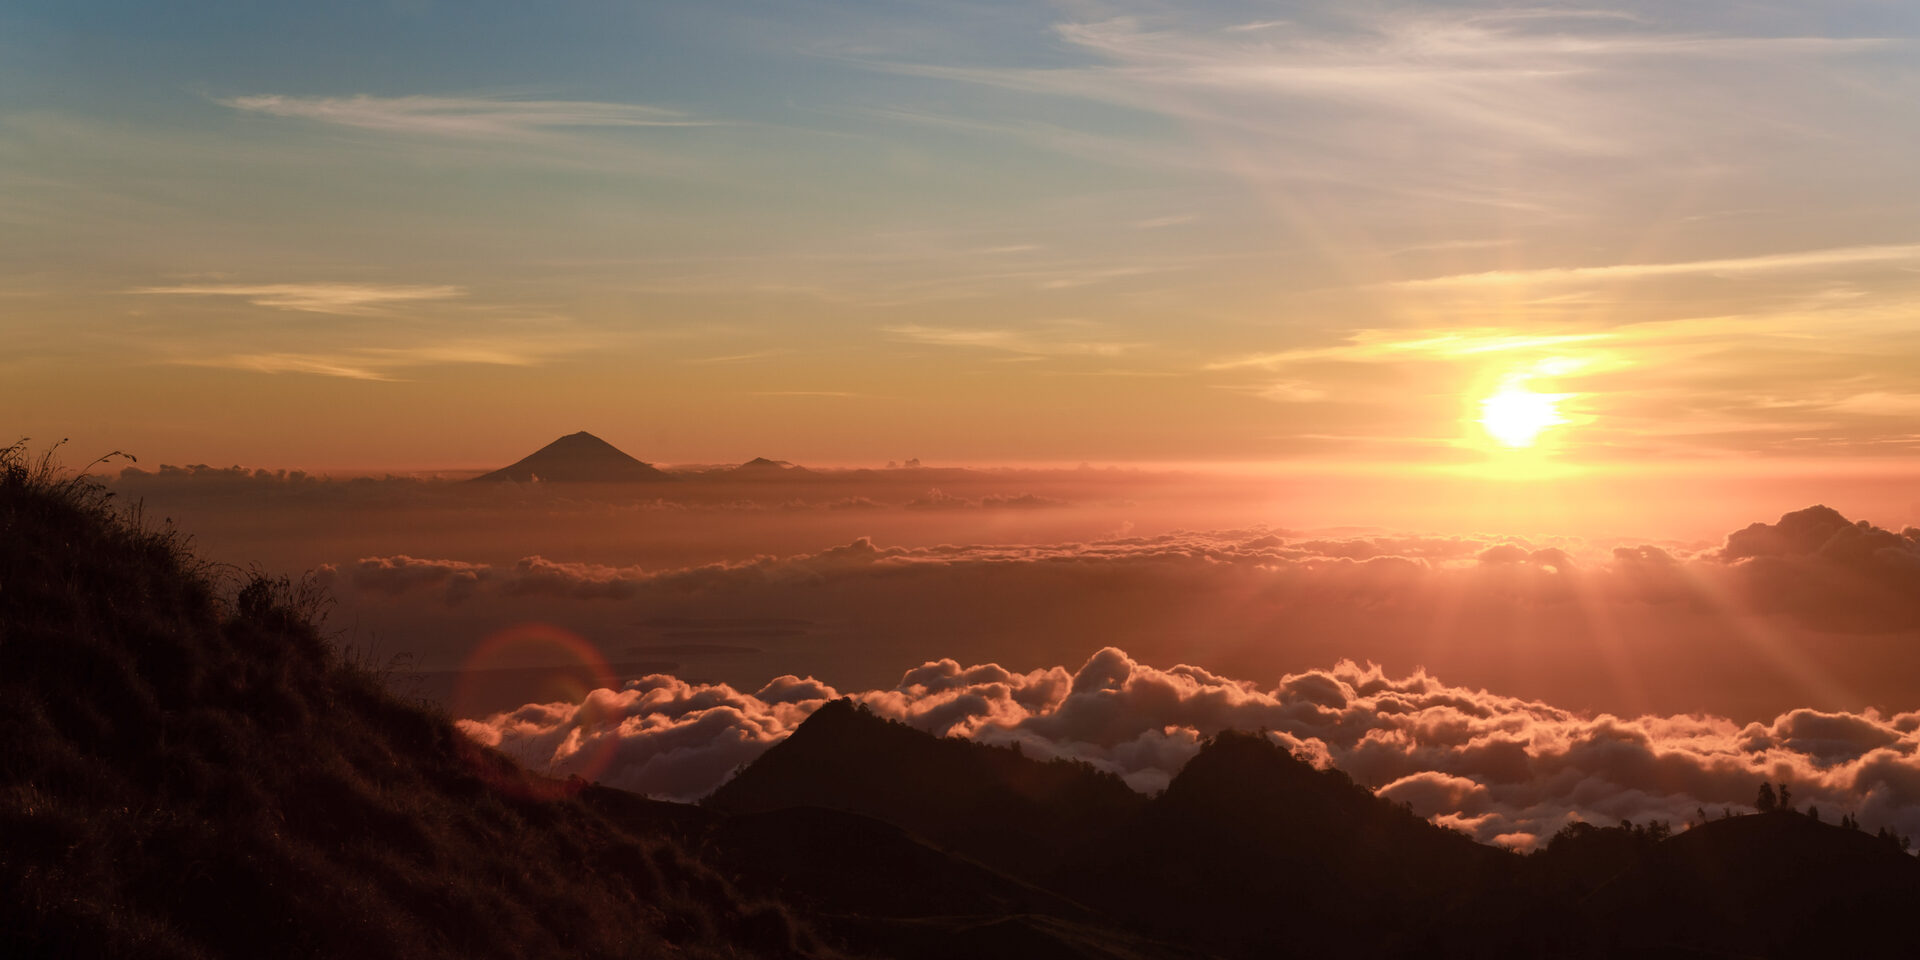 Indonesia Landscape Travel Photography Sunset on the First Day Climbing Mount Rinjani with Mount Agung in the Distance Lombok Indonesia Asia